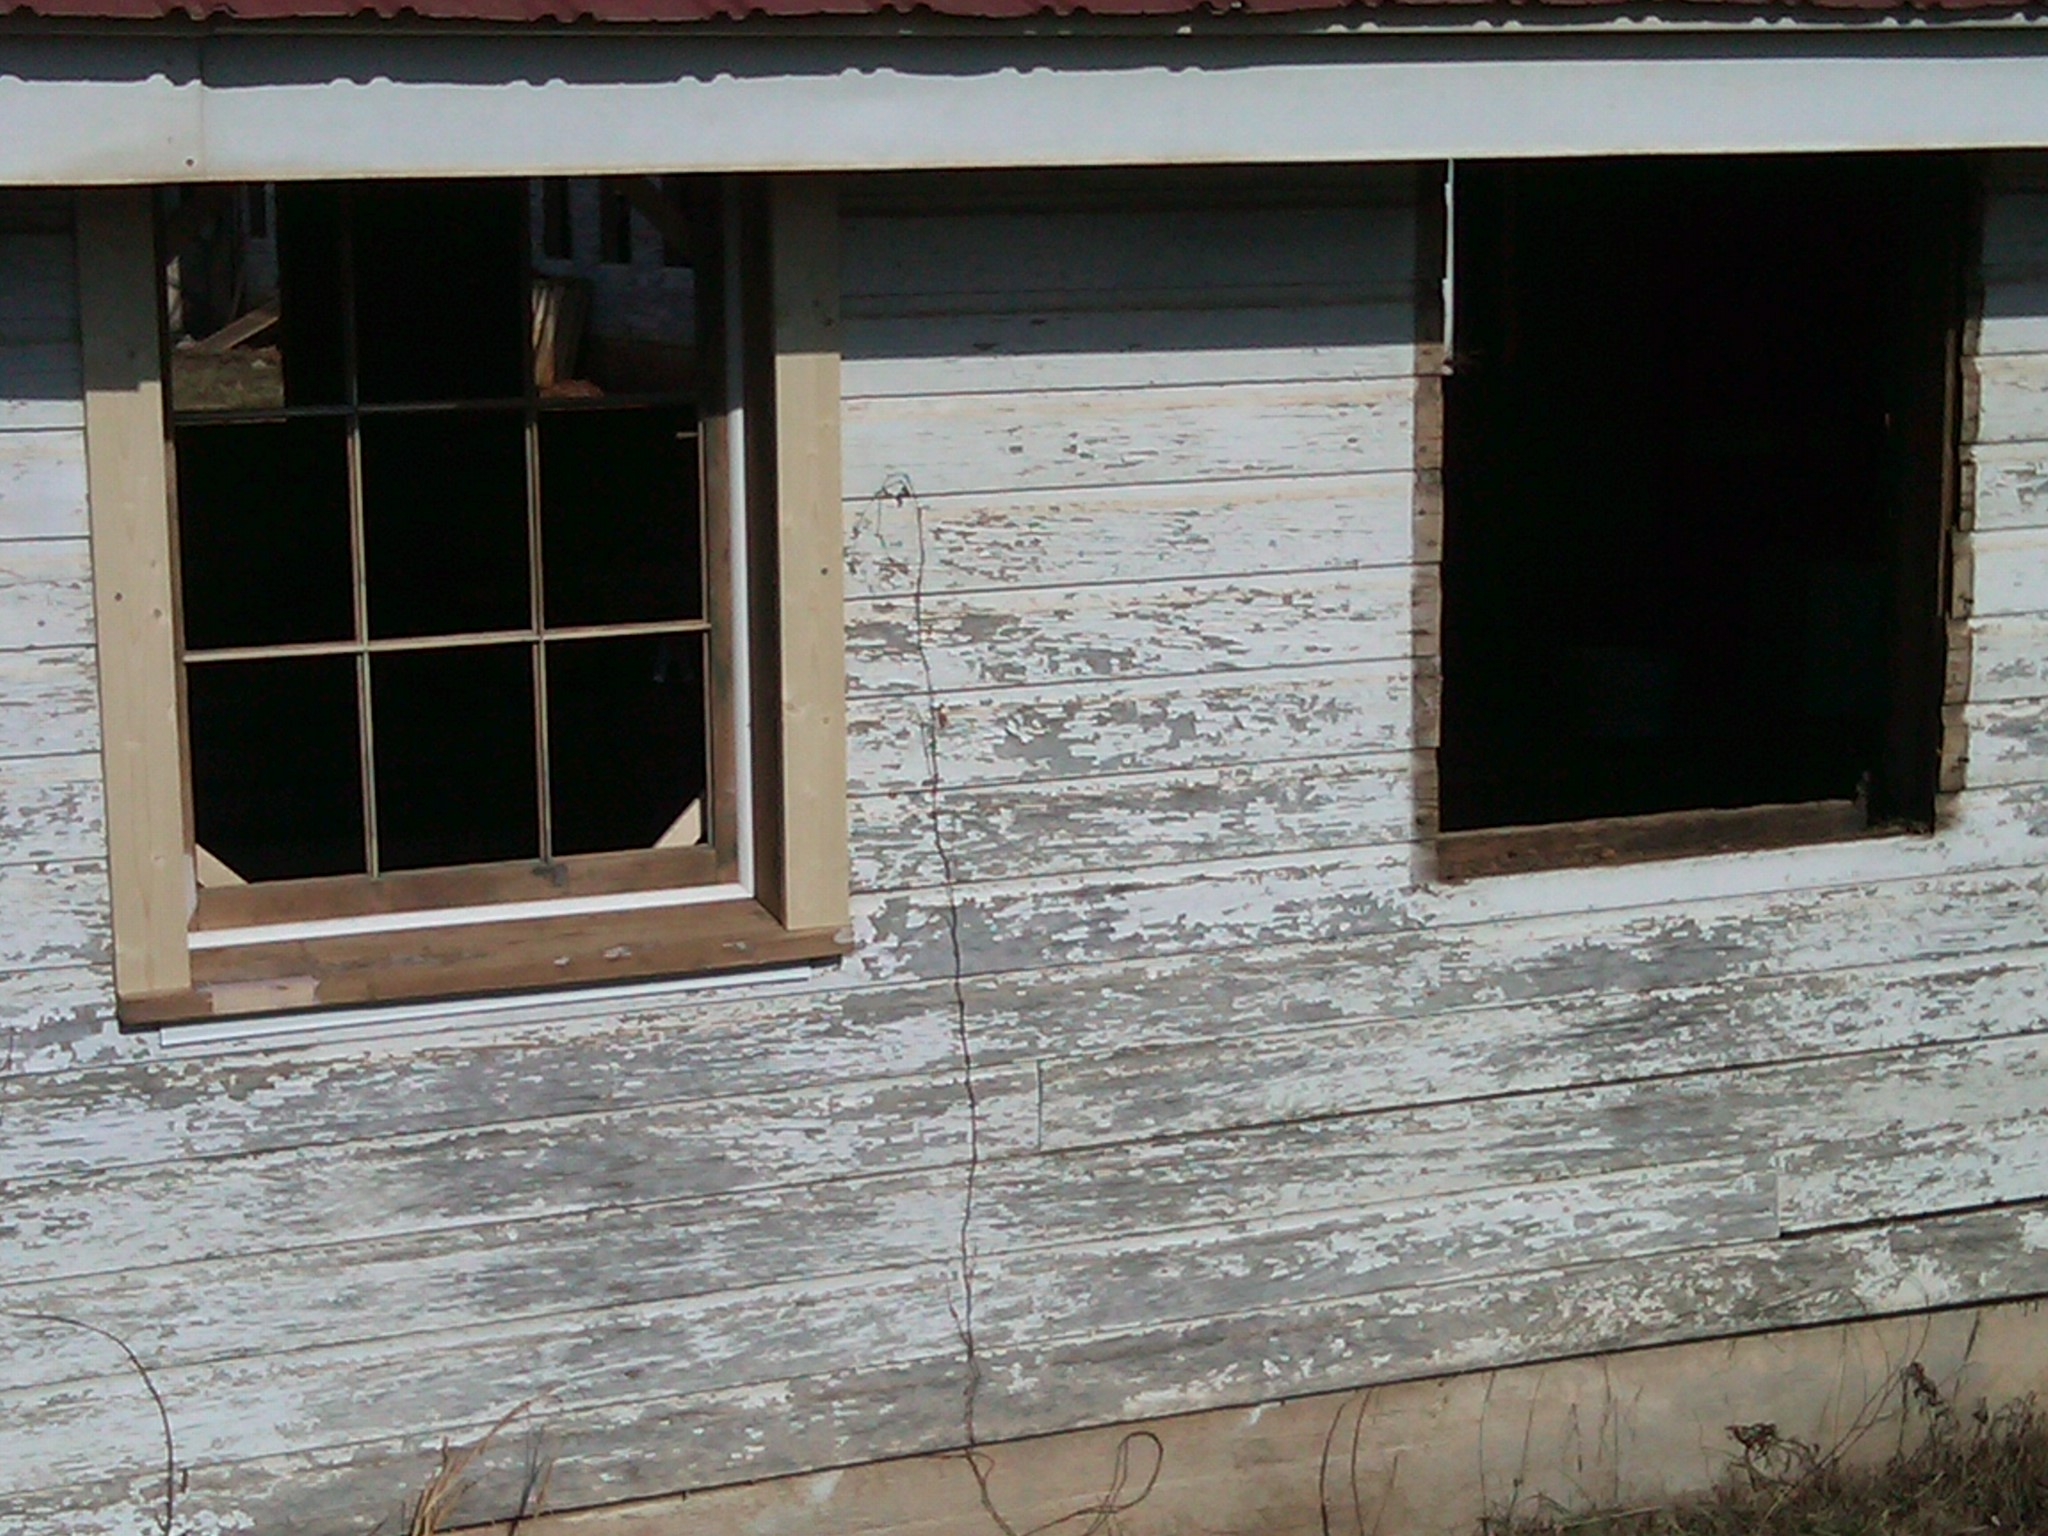 All the original windows were removed to make way for repaired or duplicated replacements.